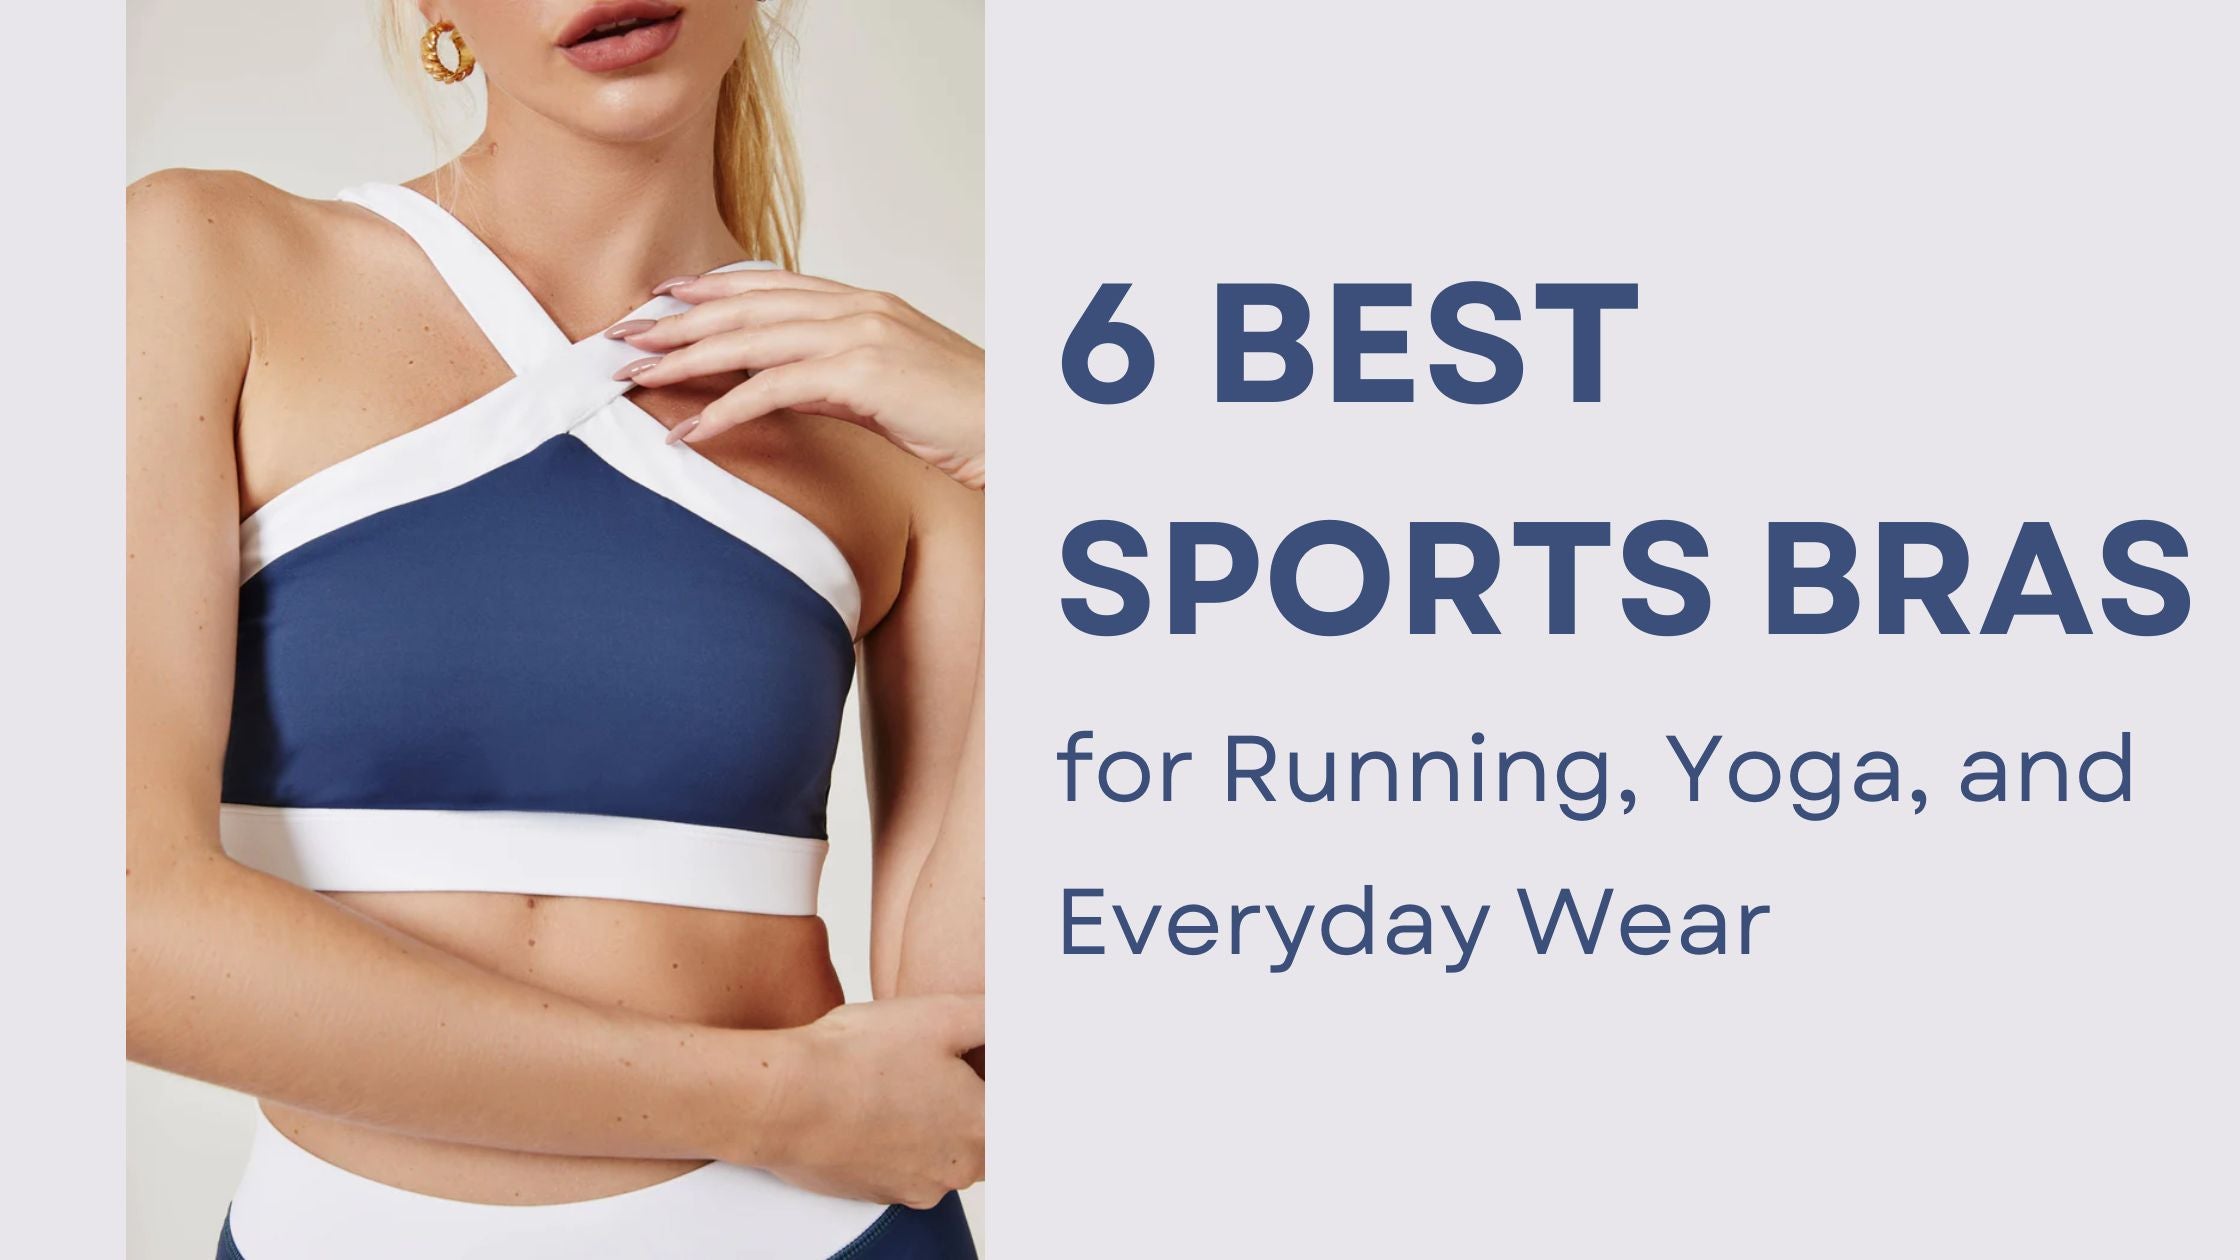 6 Best Sports Bras for Running, Yoga, and Everyday Wear – SILVERWIND